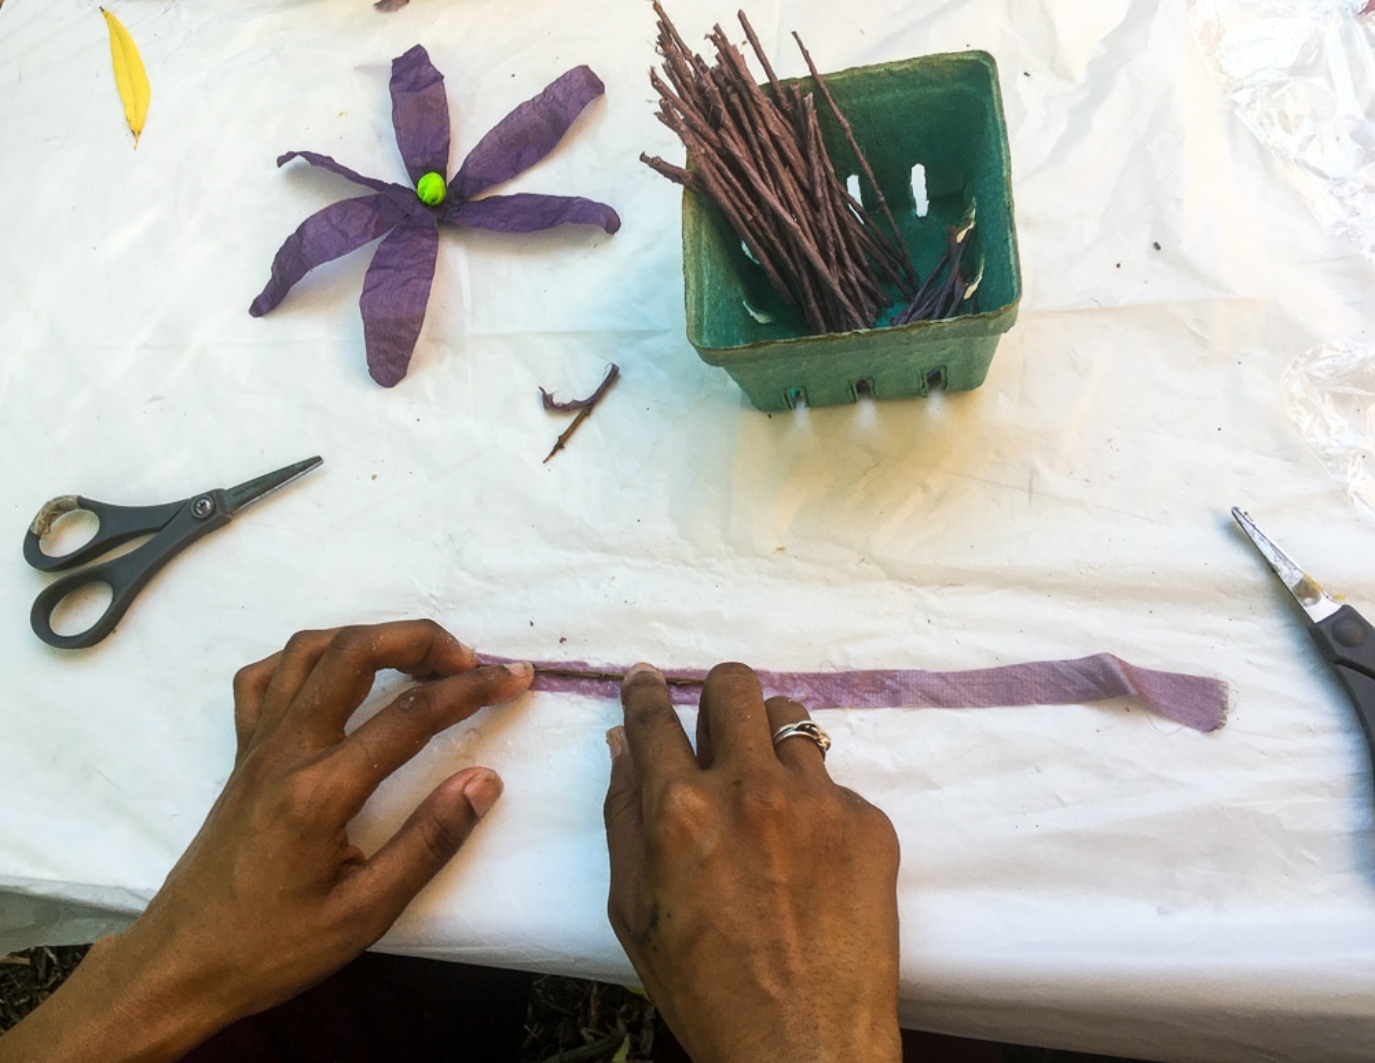 A pair of hands at the bottom of the frame is building purple flowers on a white table. There is a pair of scissors, a little box of sticks, and one completed flower (has a green button in middle of six petals.) This is the NYC event.